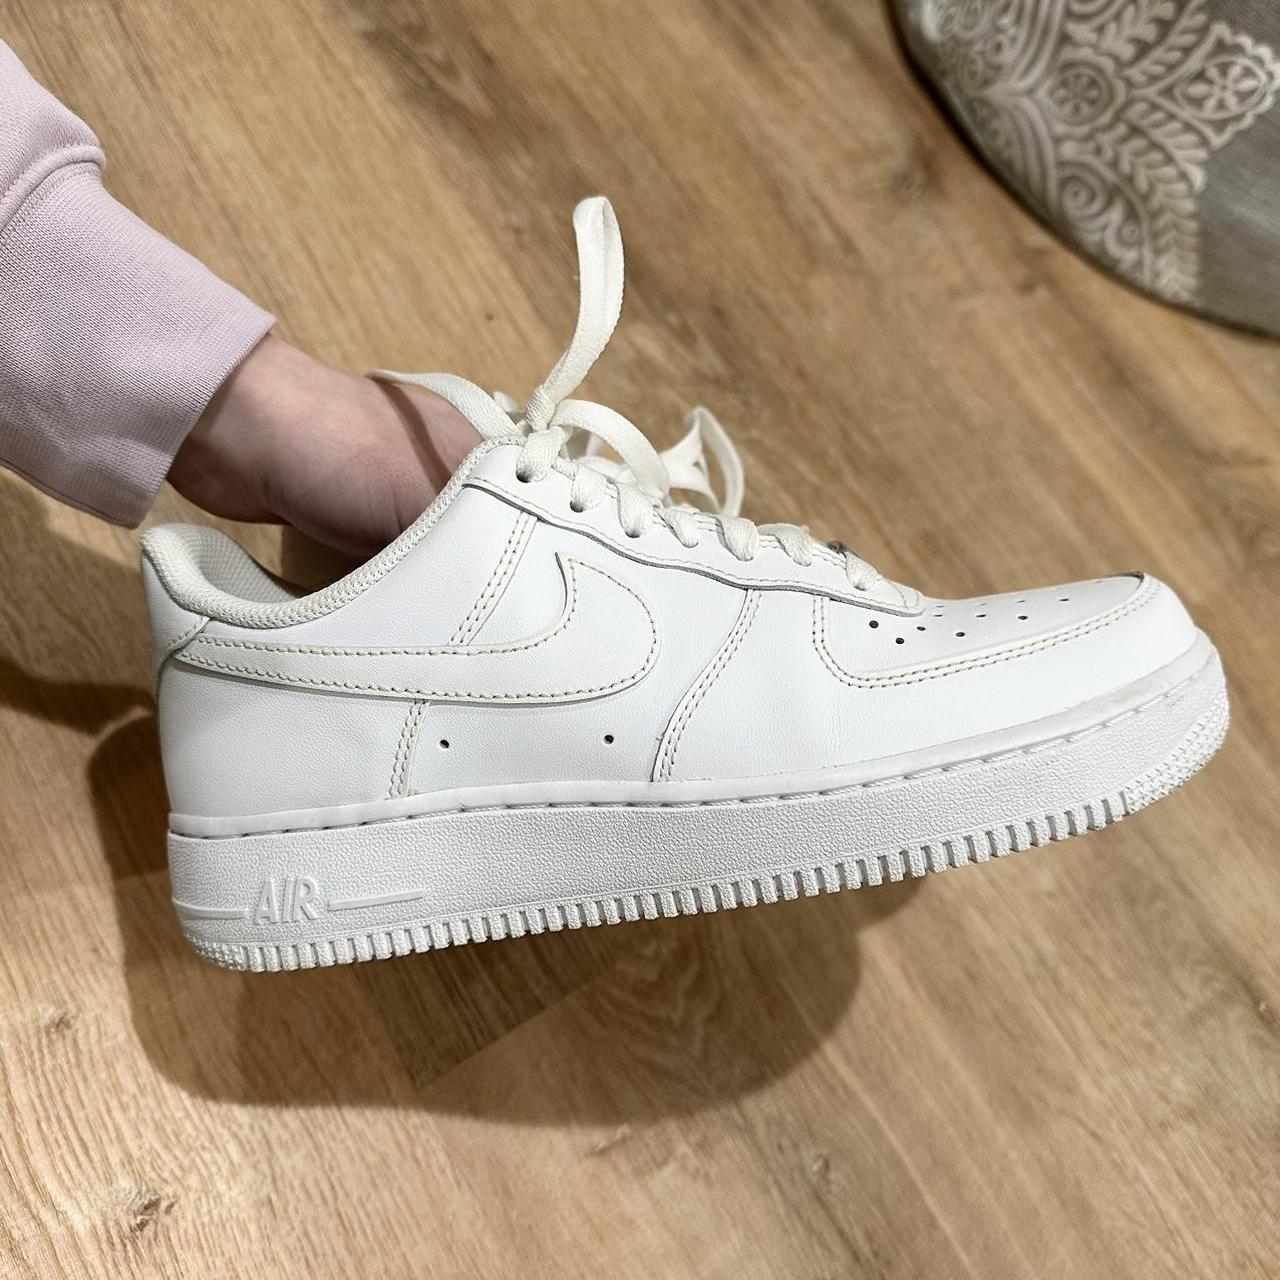 nike air force 1 women’s size 8 lightly used, no... - Depop